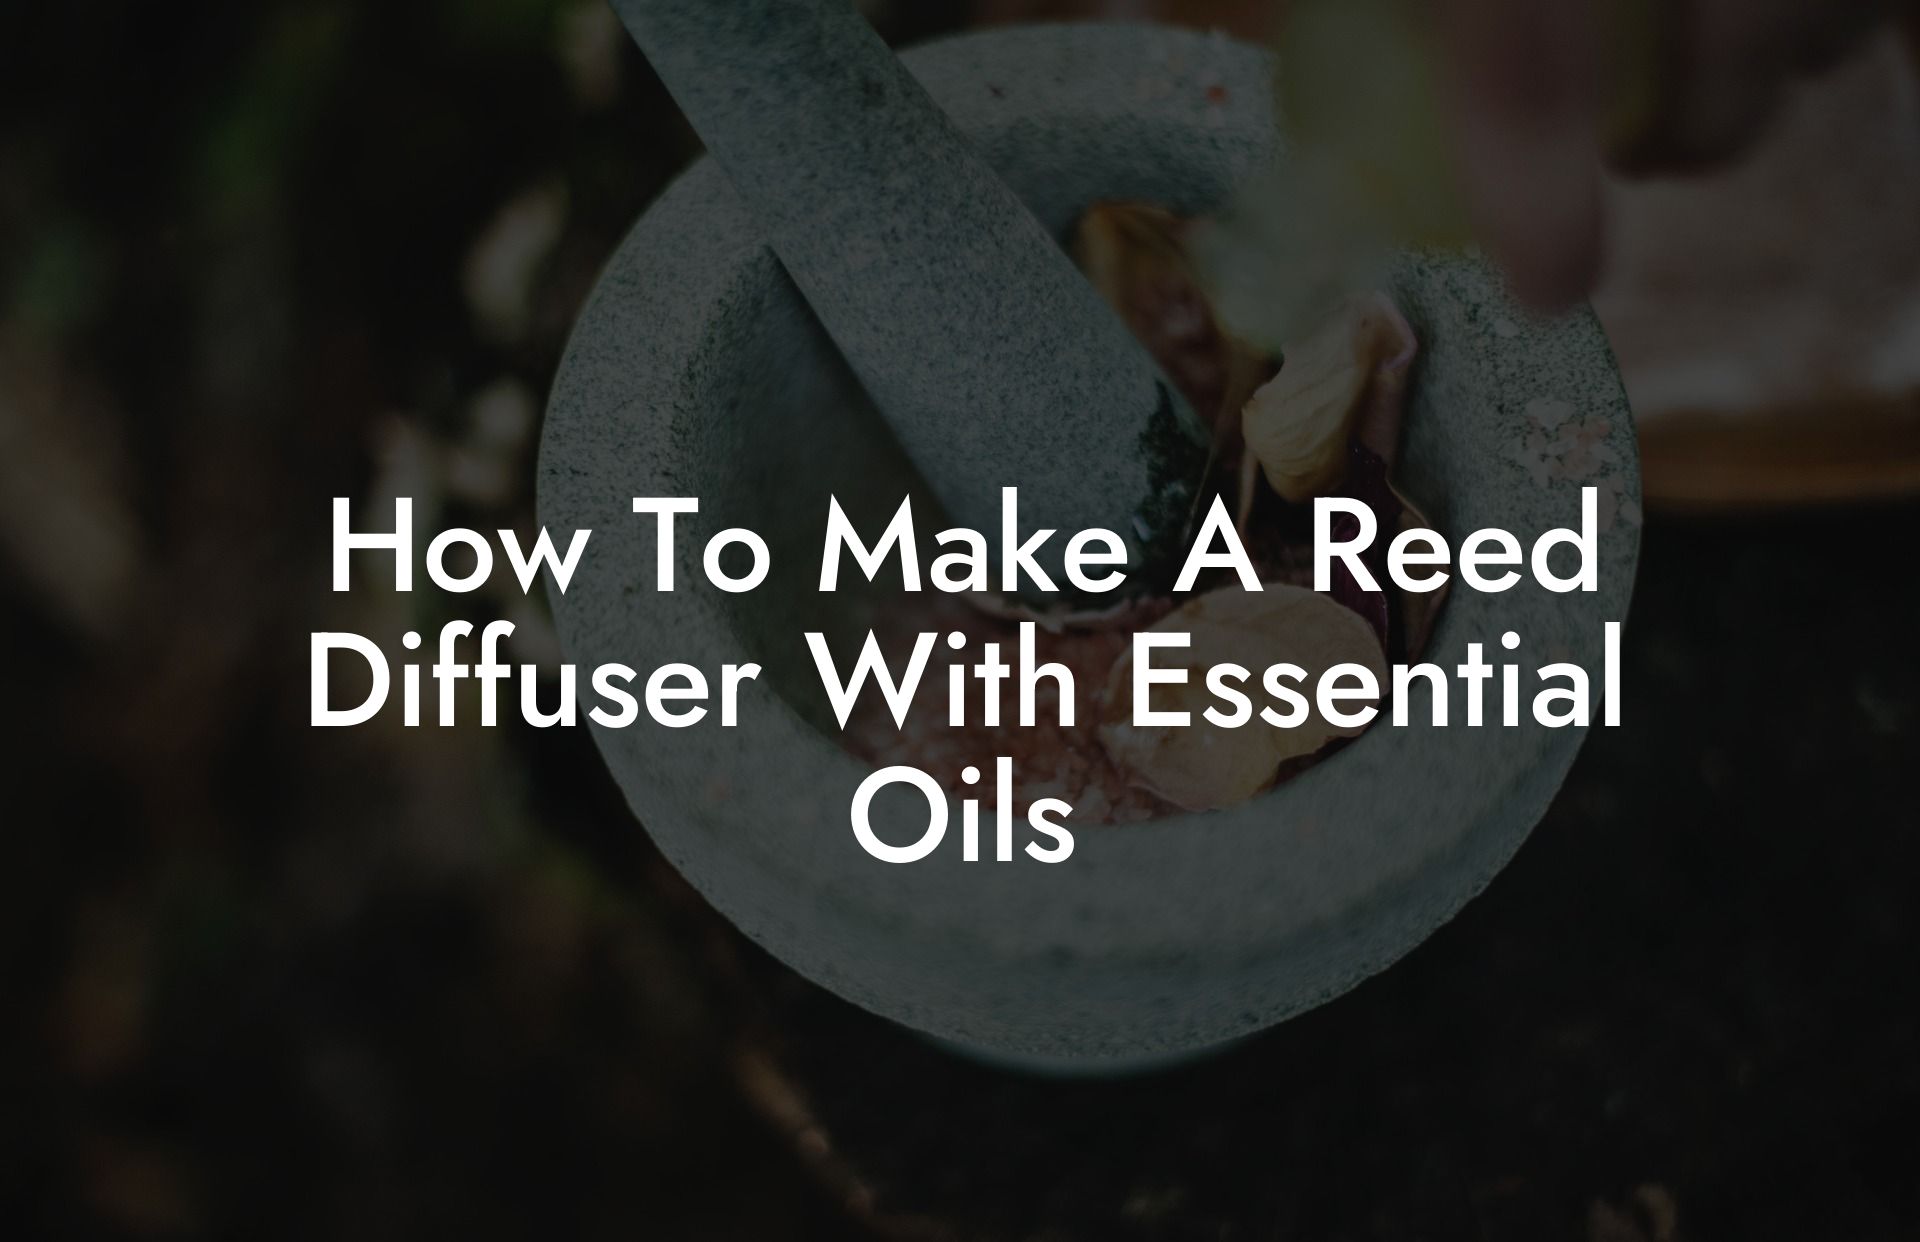 How To Make A Reed Diffuser With Essential Oils